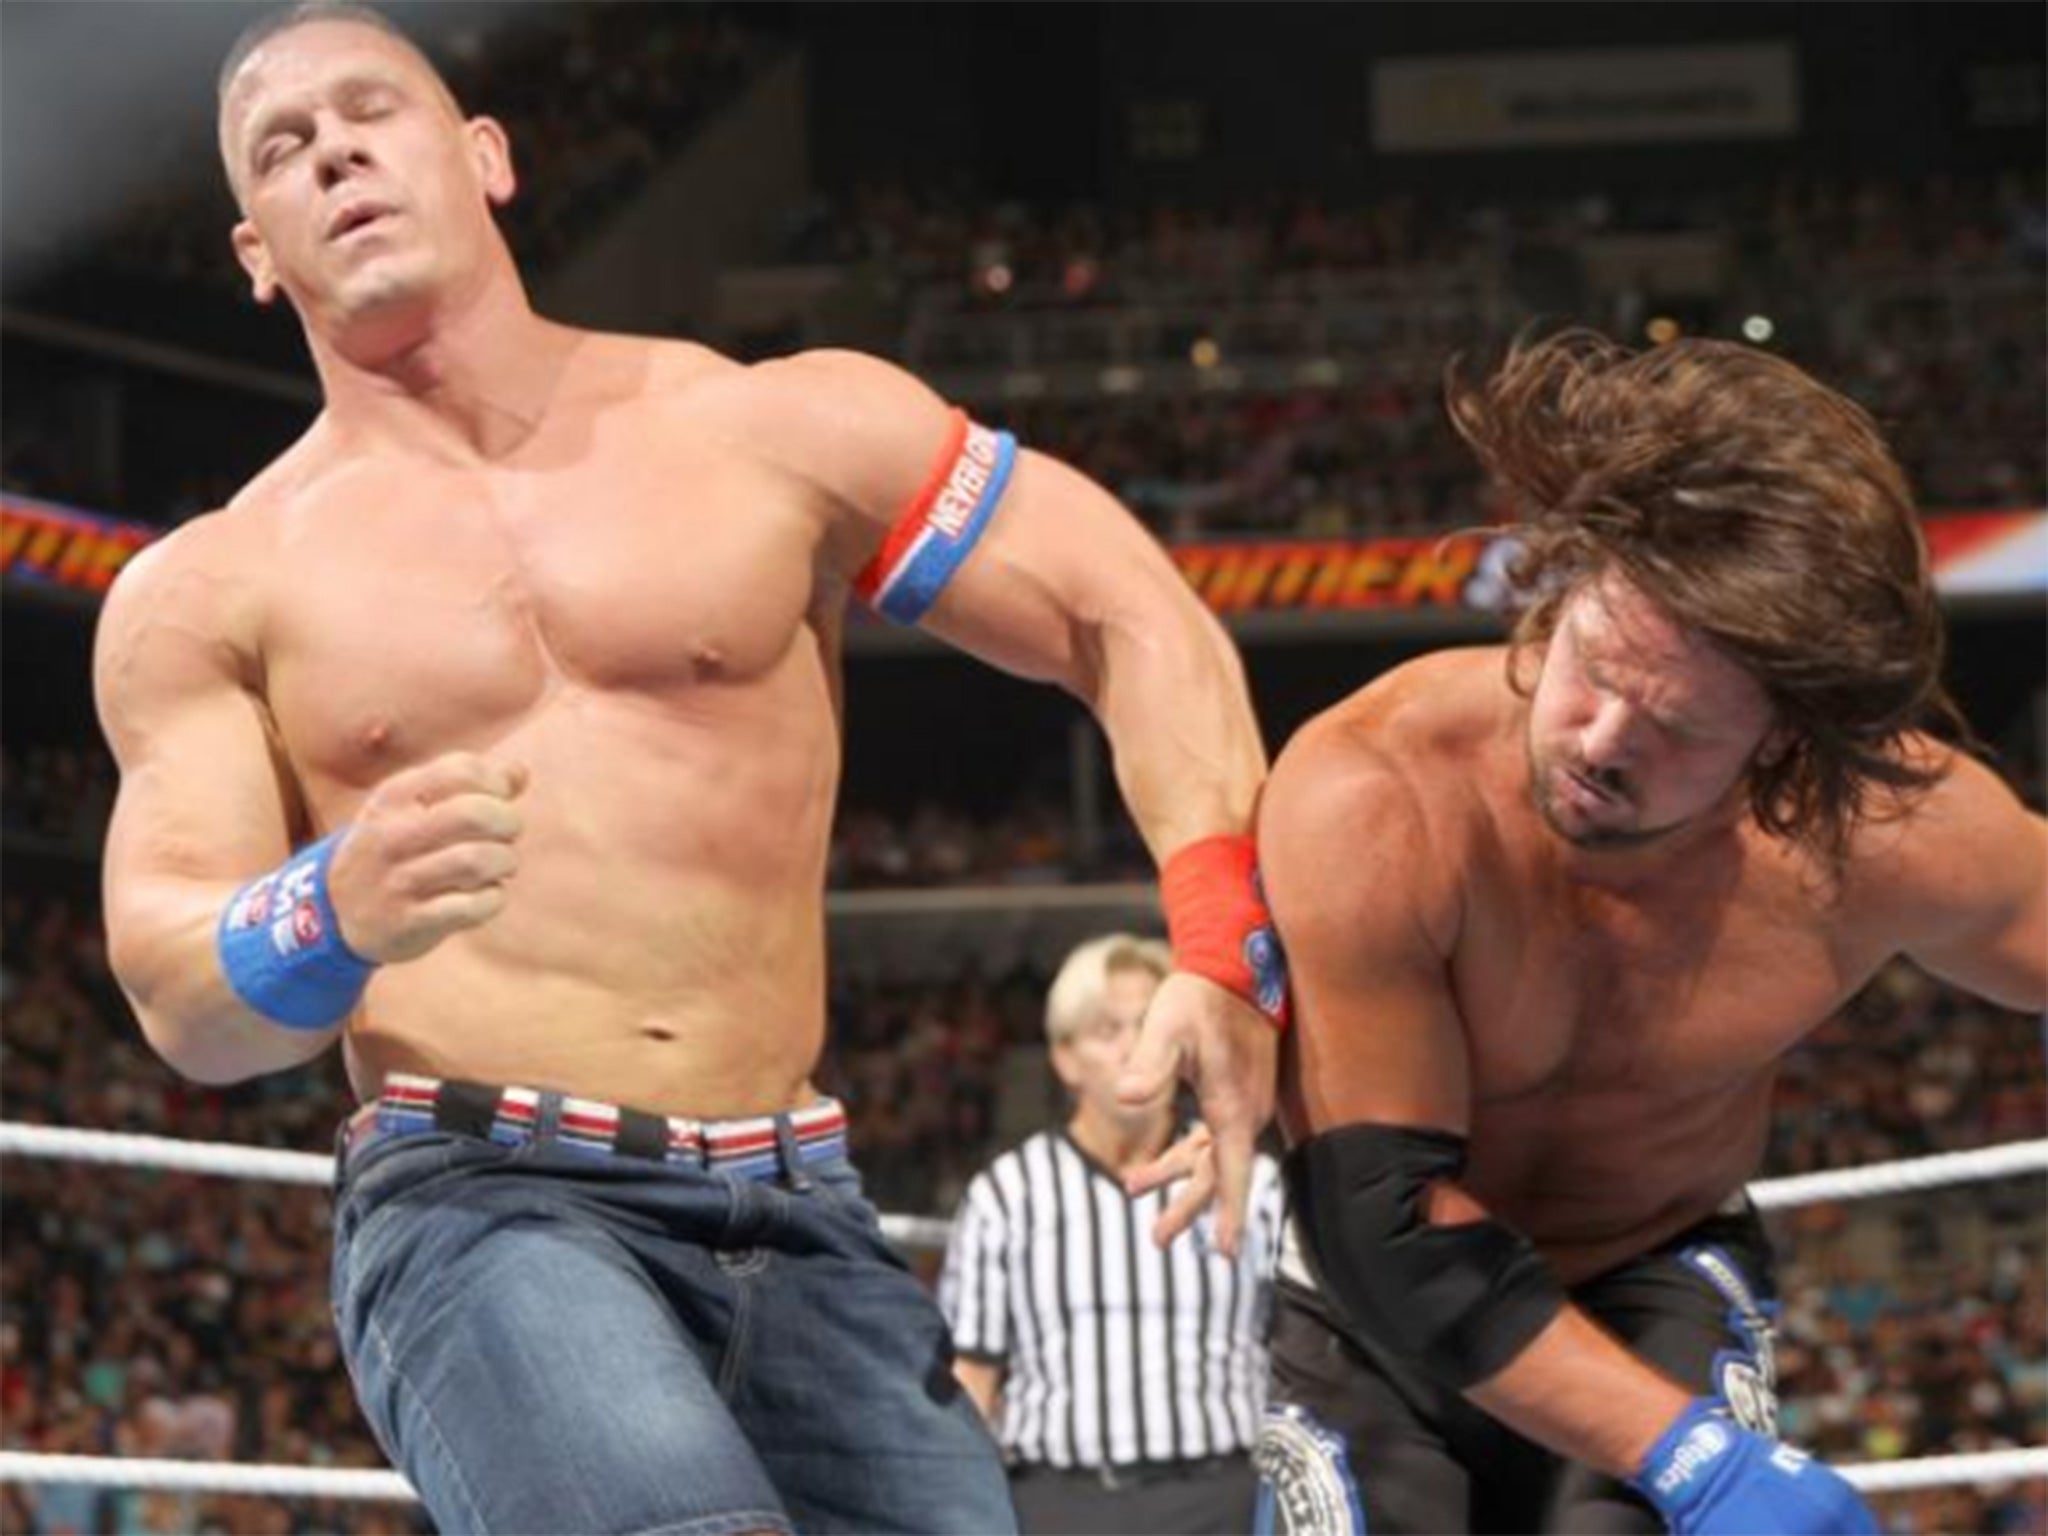 Styles eked out a victory against Cena at the Barclay's Center